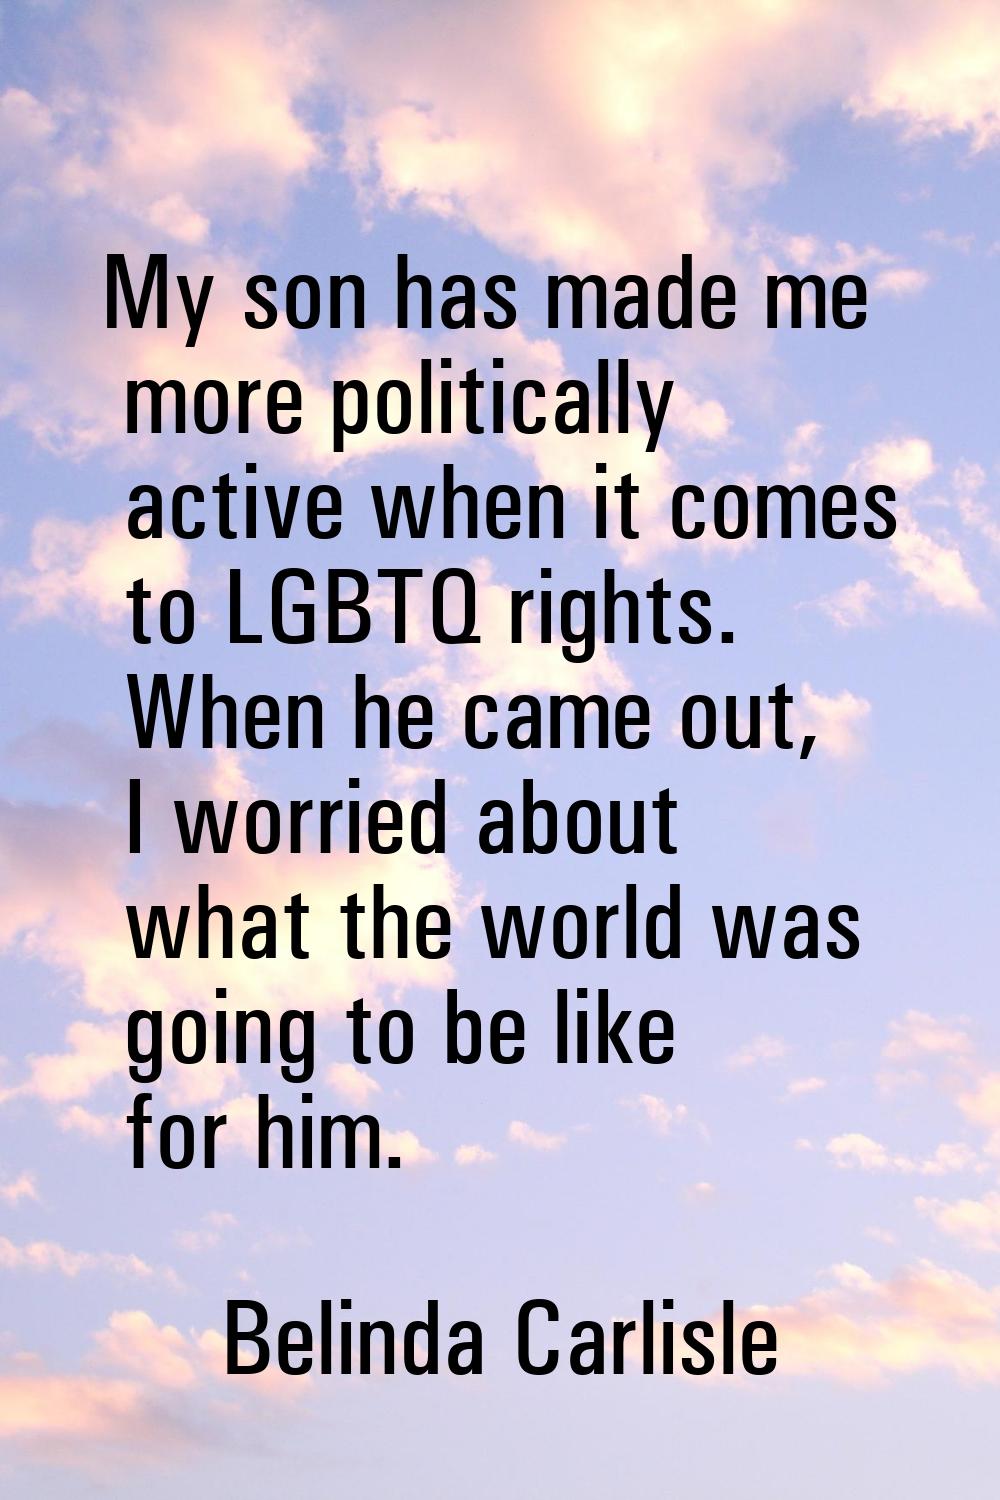 My son has made me more politically active when it comes to LGBTQ rights. When he came out, I worri